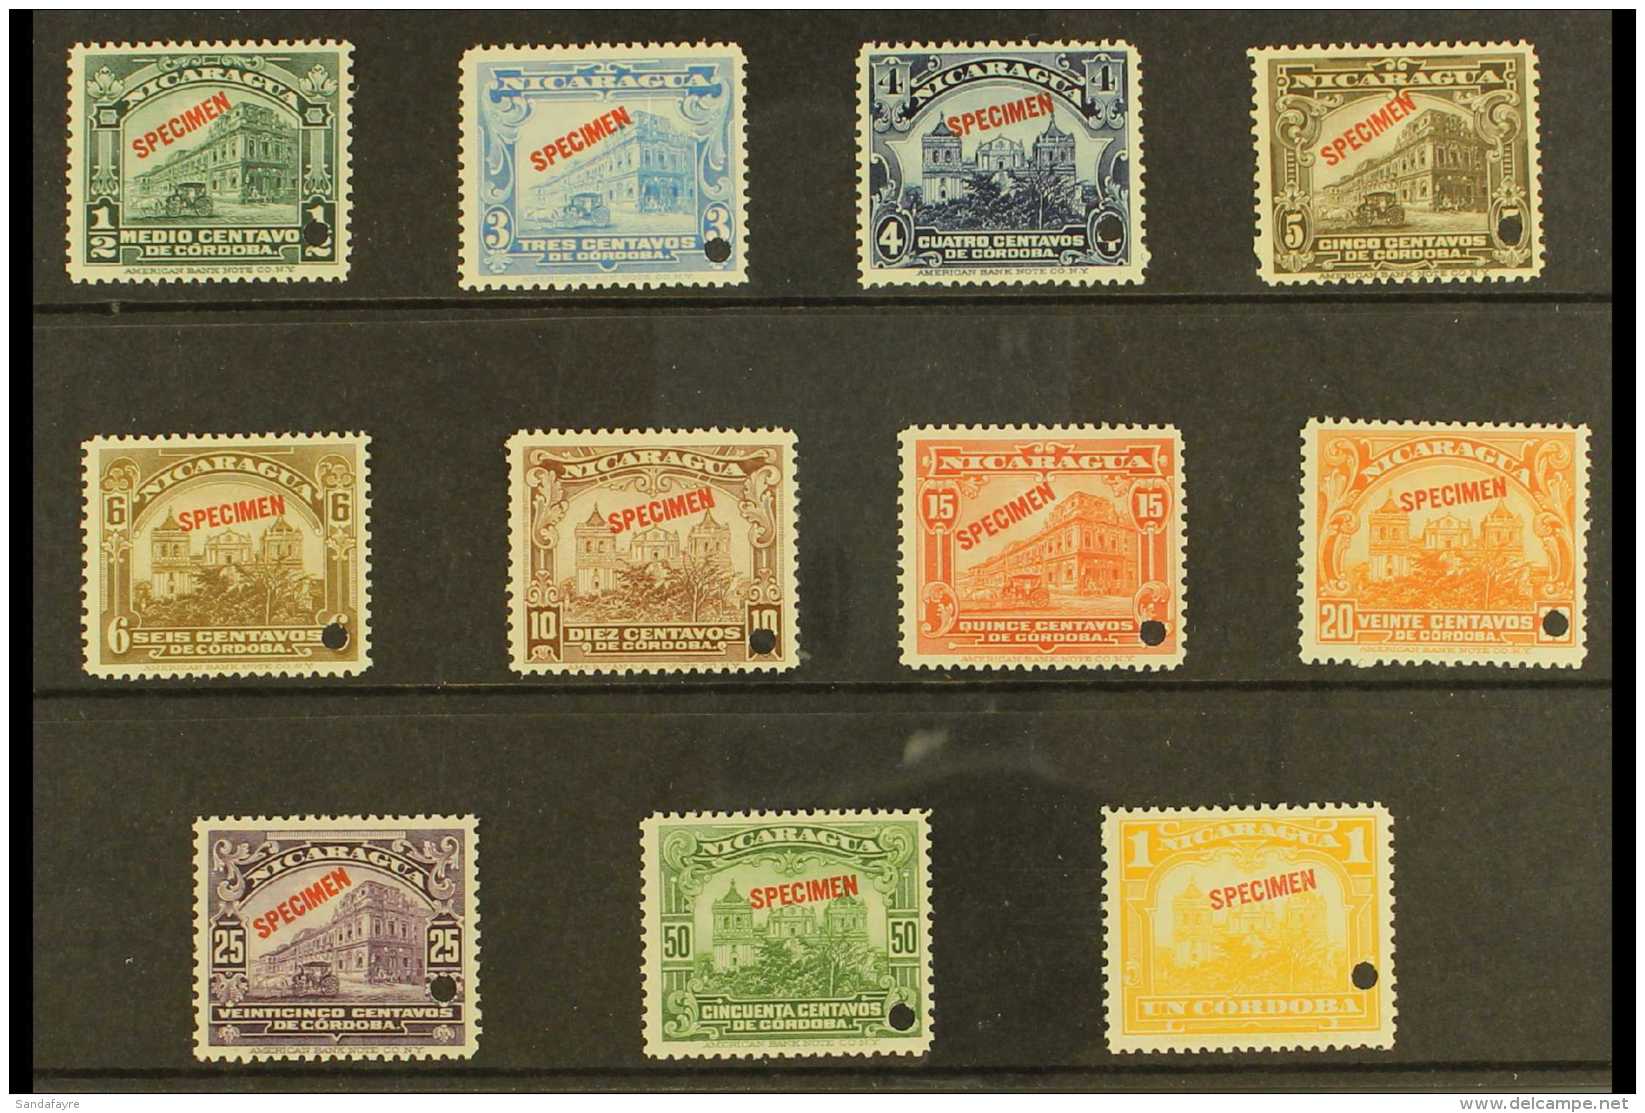 1929-31 Complete Set (Sc 513/23, SG 617/27) Overprinted "SPECIMEN" And With Security Punch Hole, Never Hinged... - Nicaragua